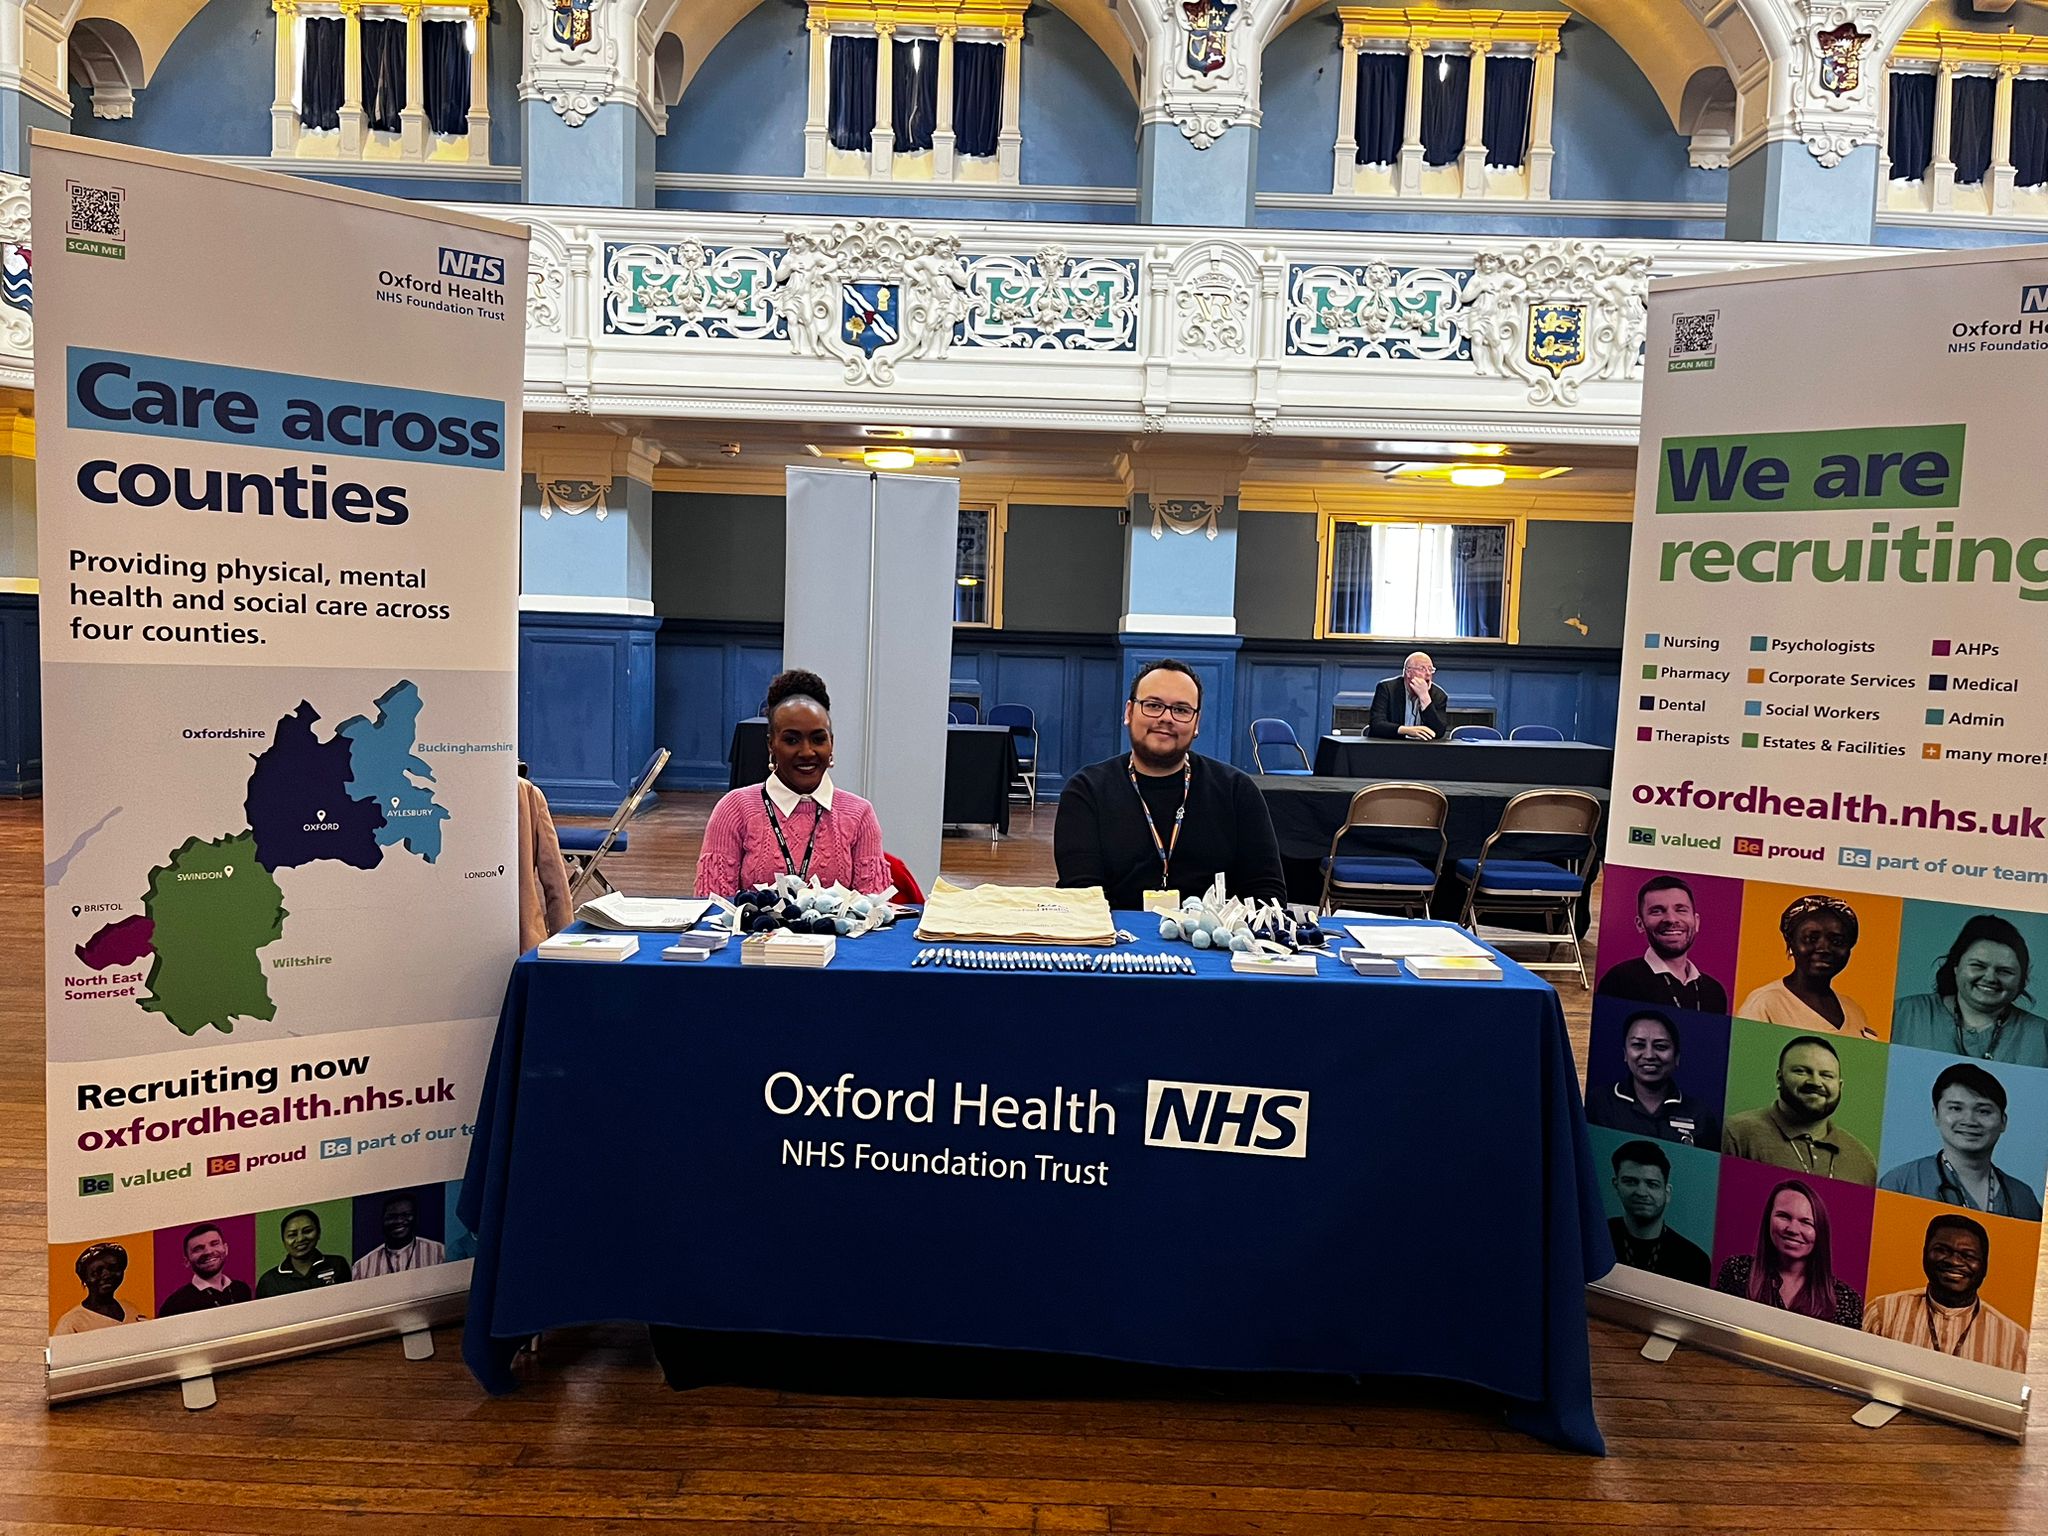 Oxford Health NHS at our event in Oxford